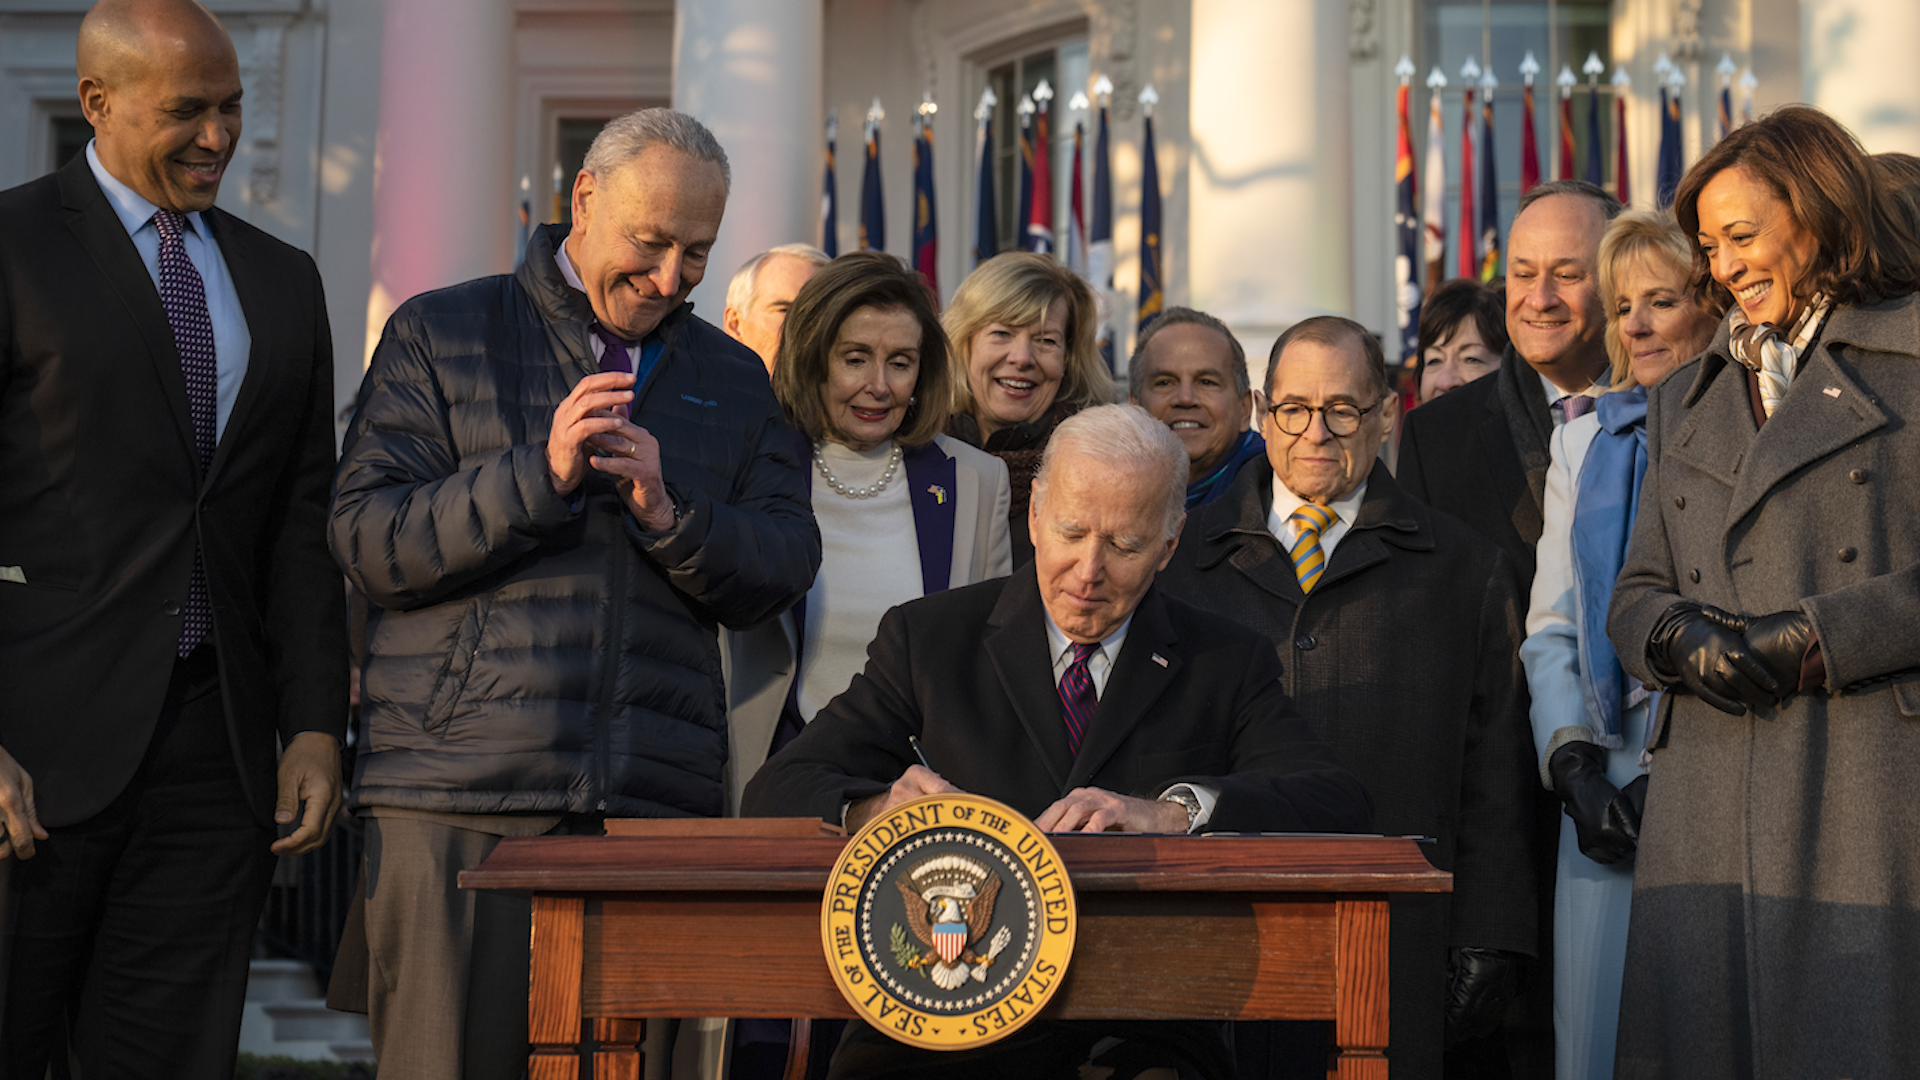 Biden signs Respect for Marriage Act, protecting same-sex, interracial couples pic